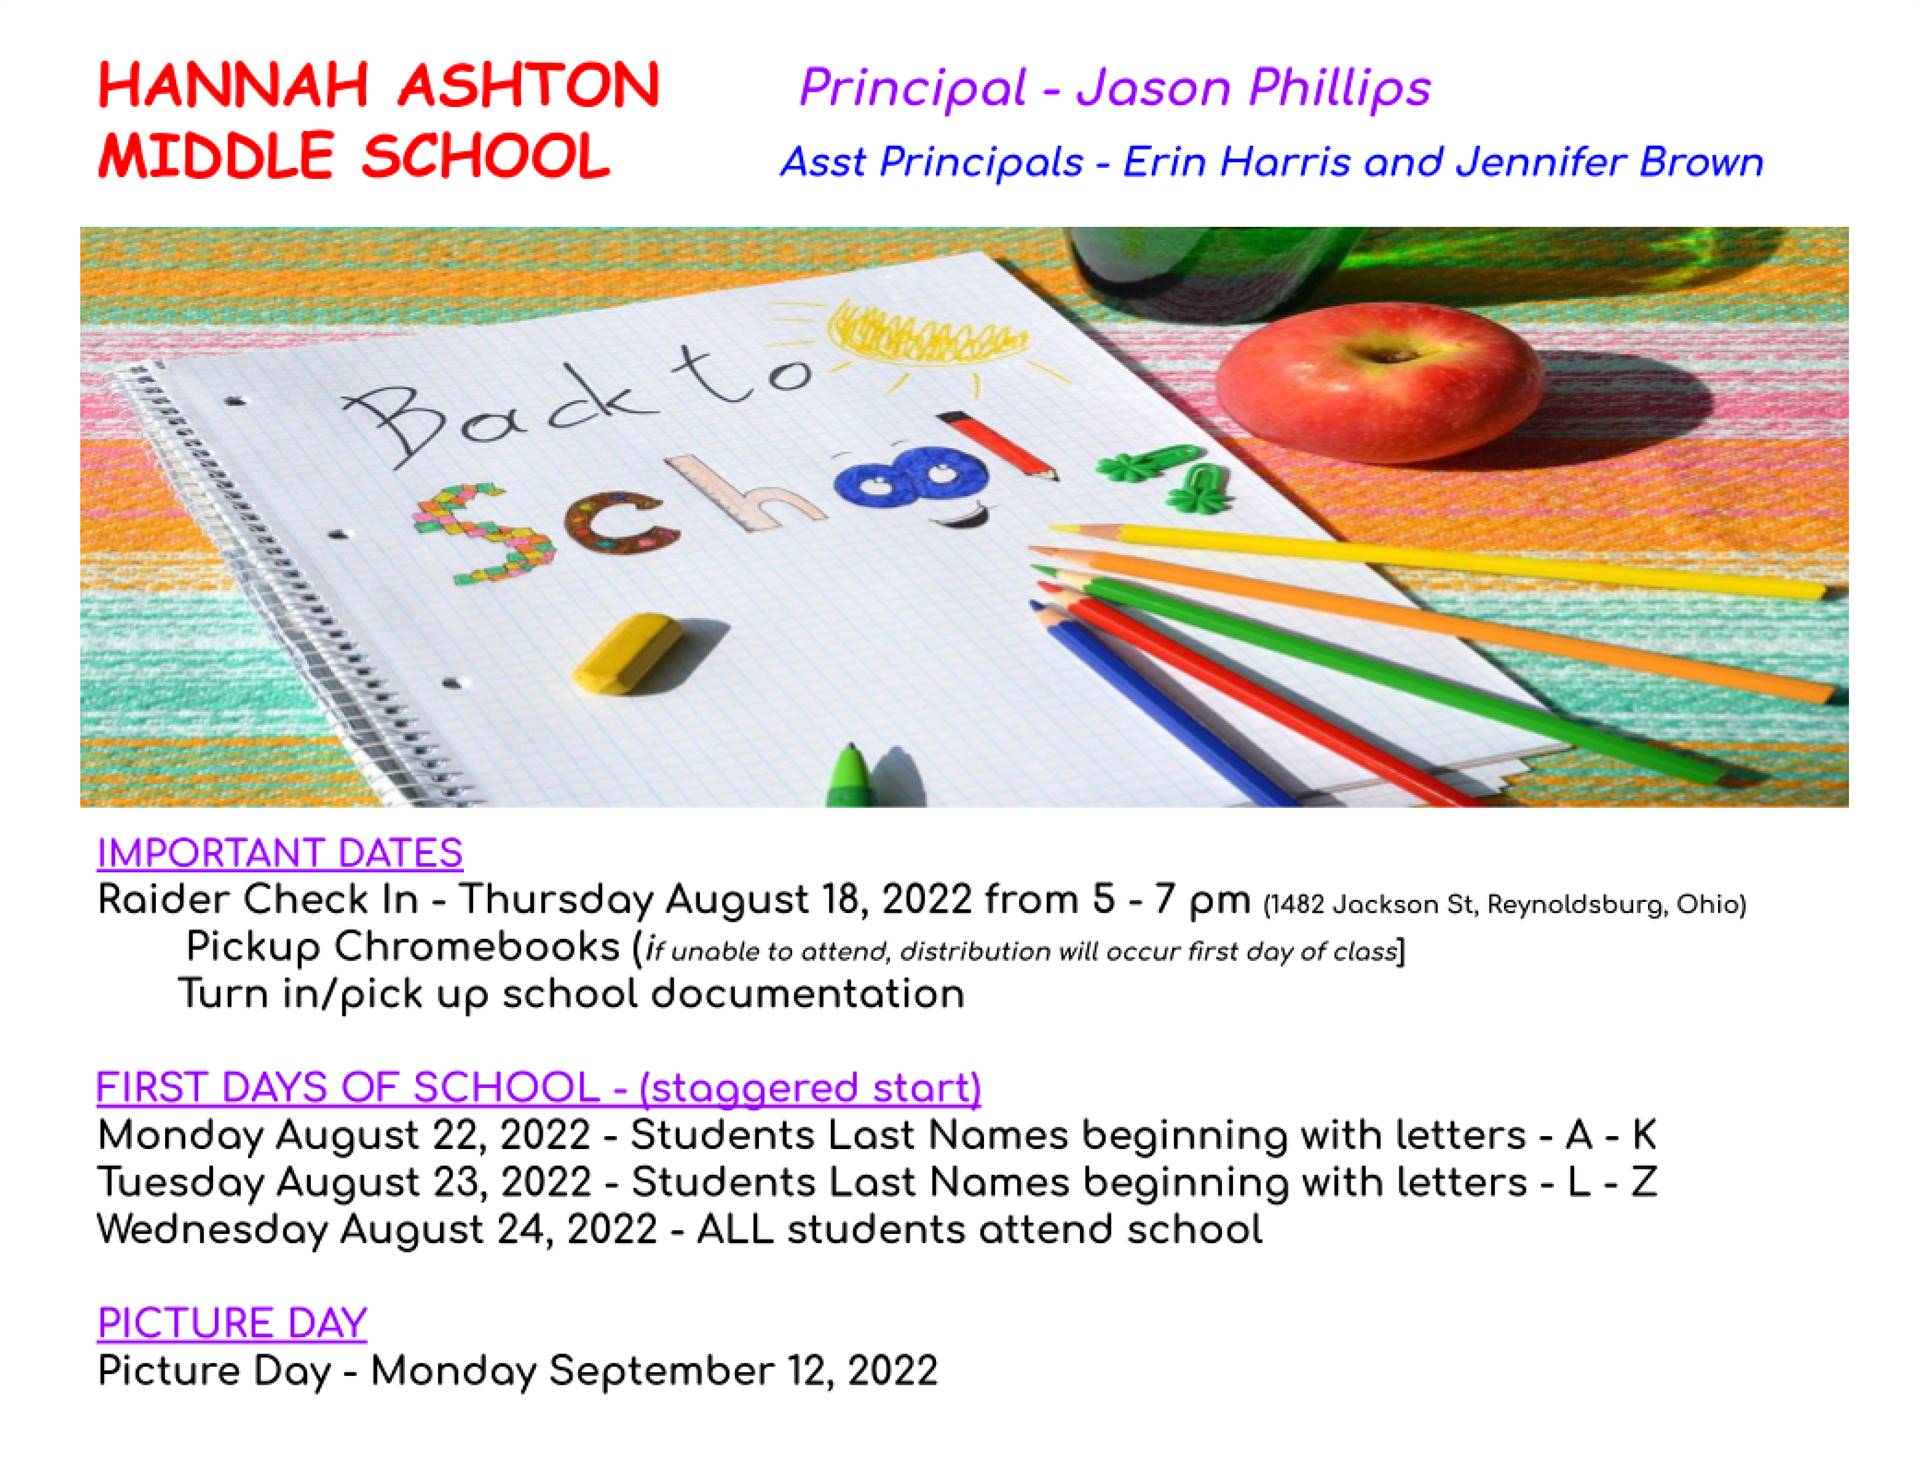 Image shows a notebook, colored pencils, an apple and says "Back to School." The information on the 